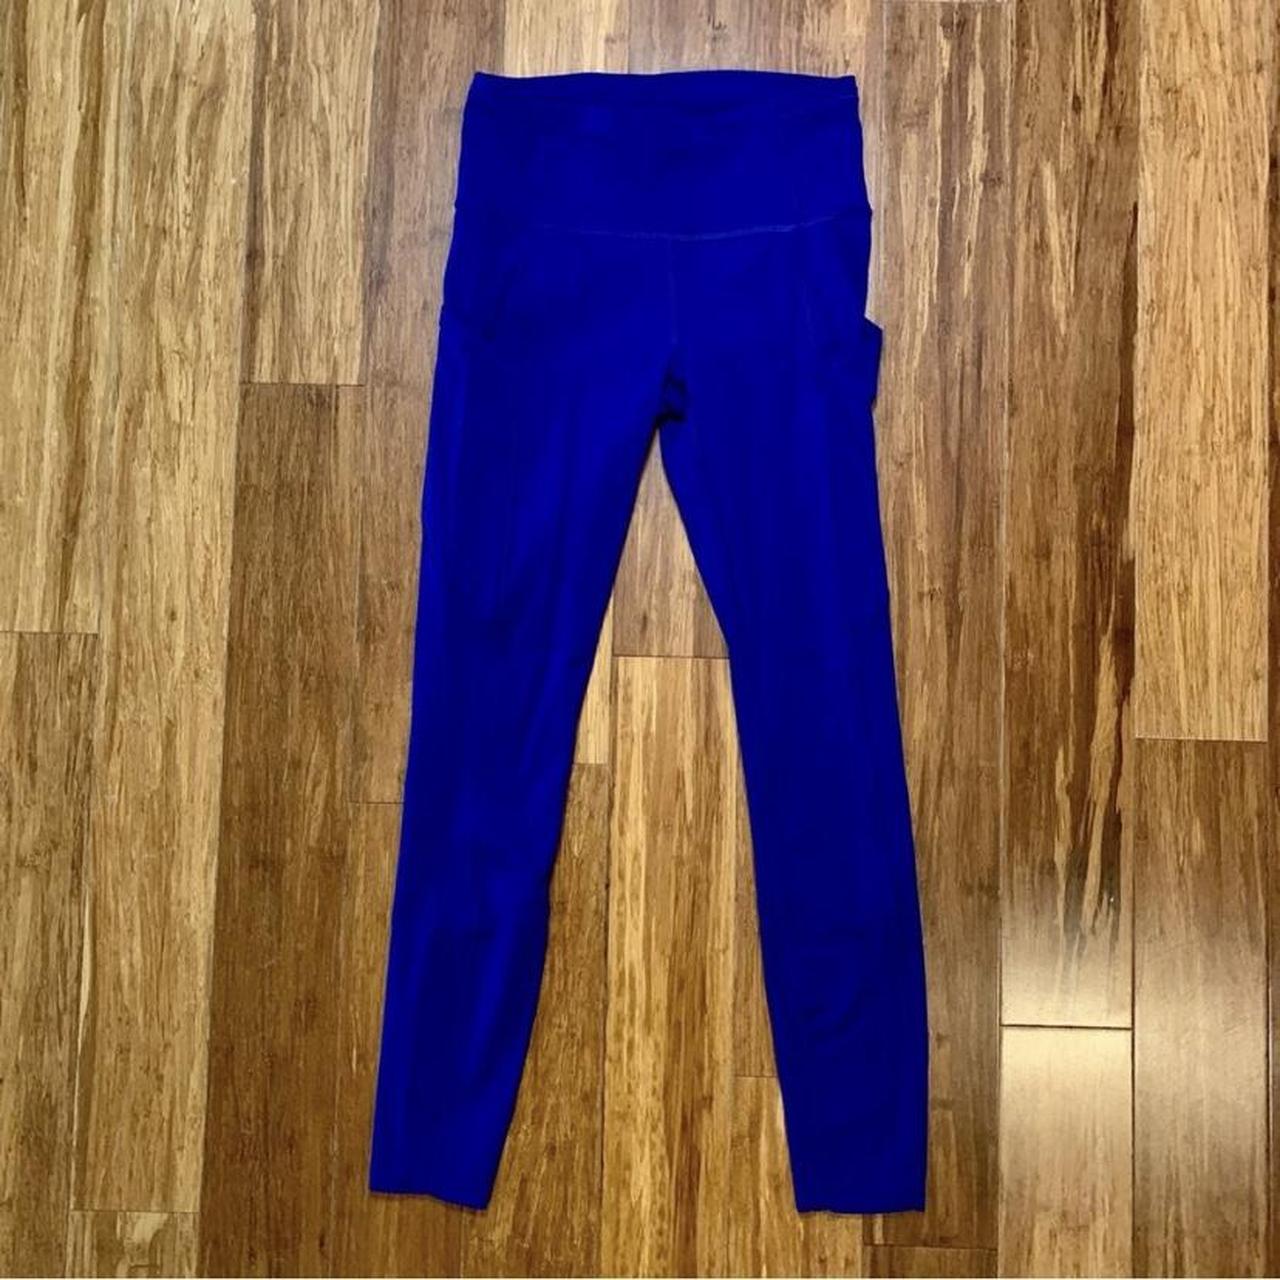 Lululemon Fast and Free High-Rise Tight 25” Size 4 - Depop